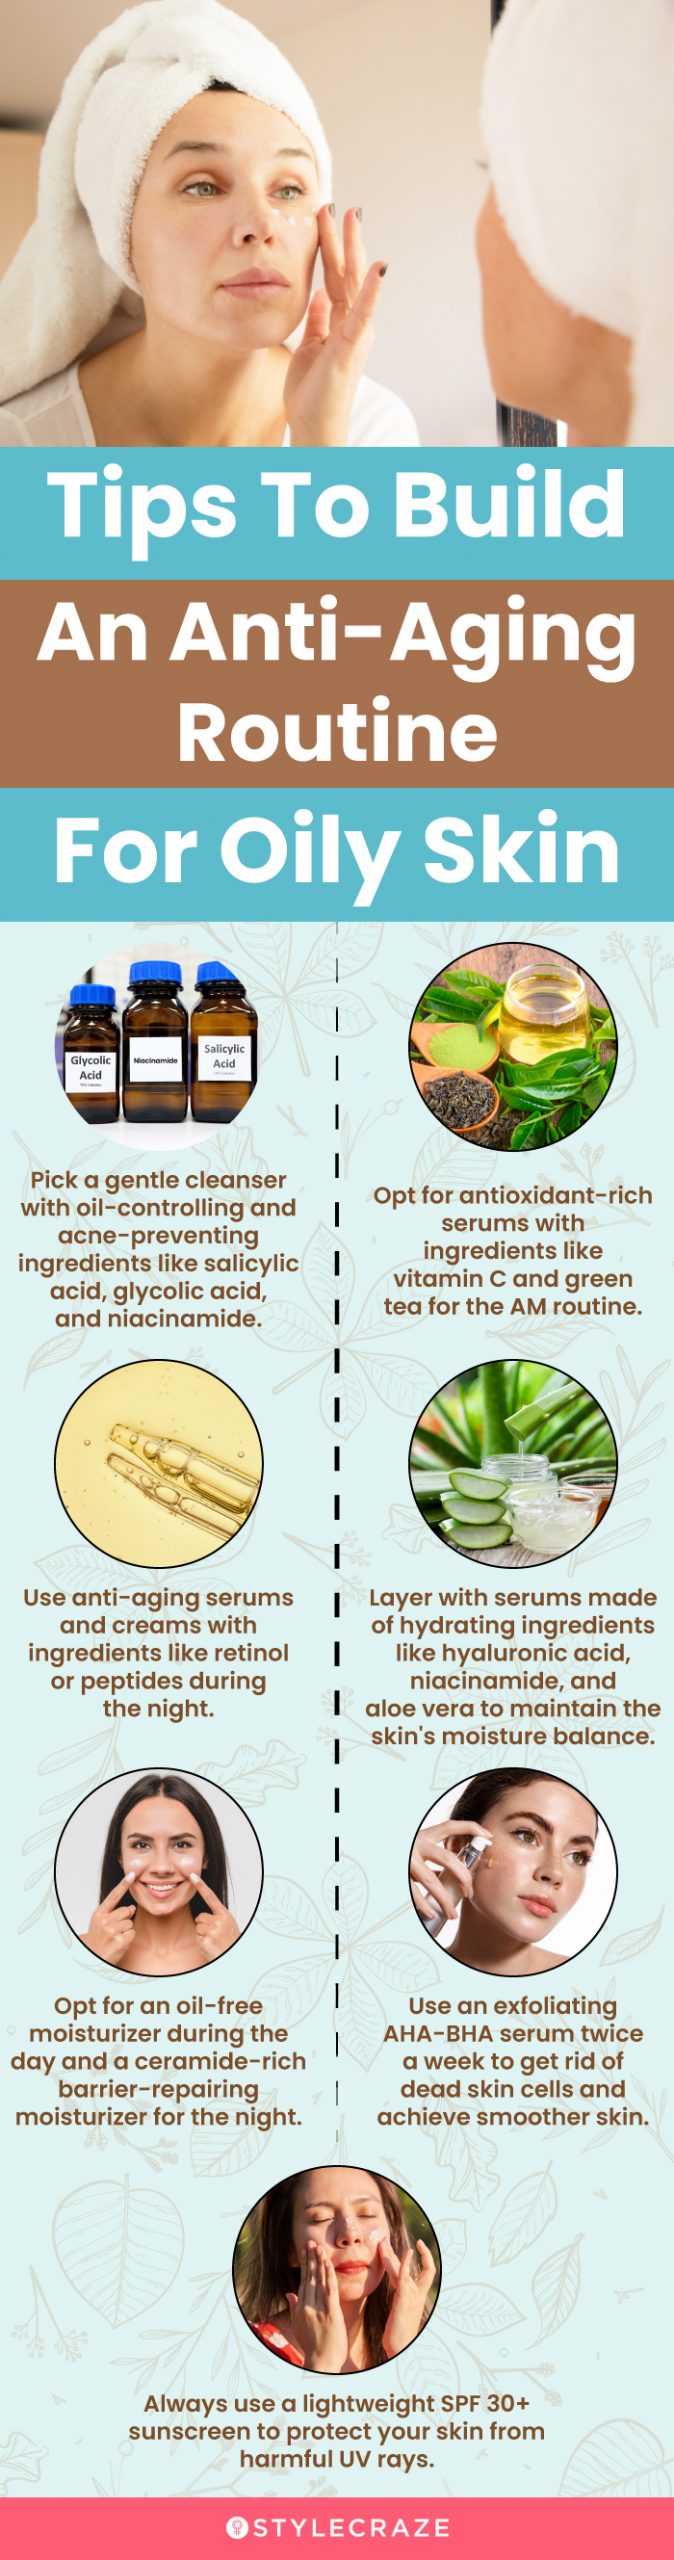 Tips To Build An Anti-Aging Routine For Oily Skin (infographic)